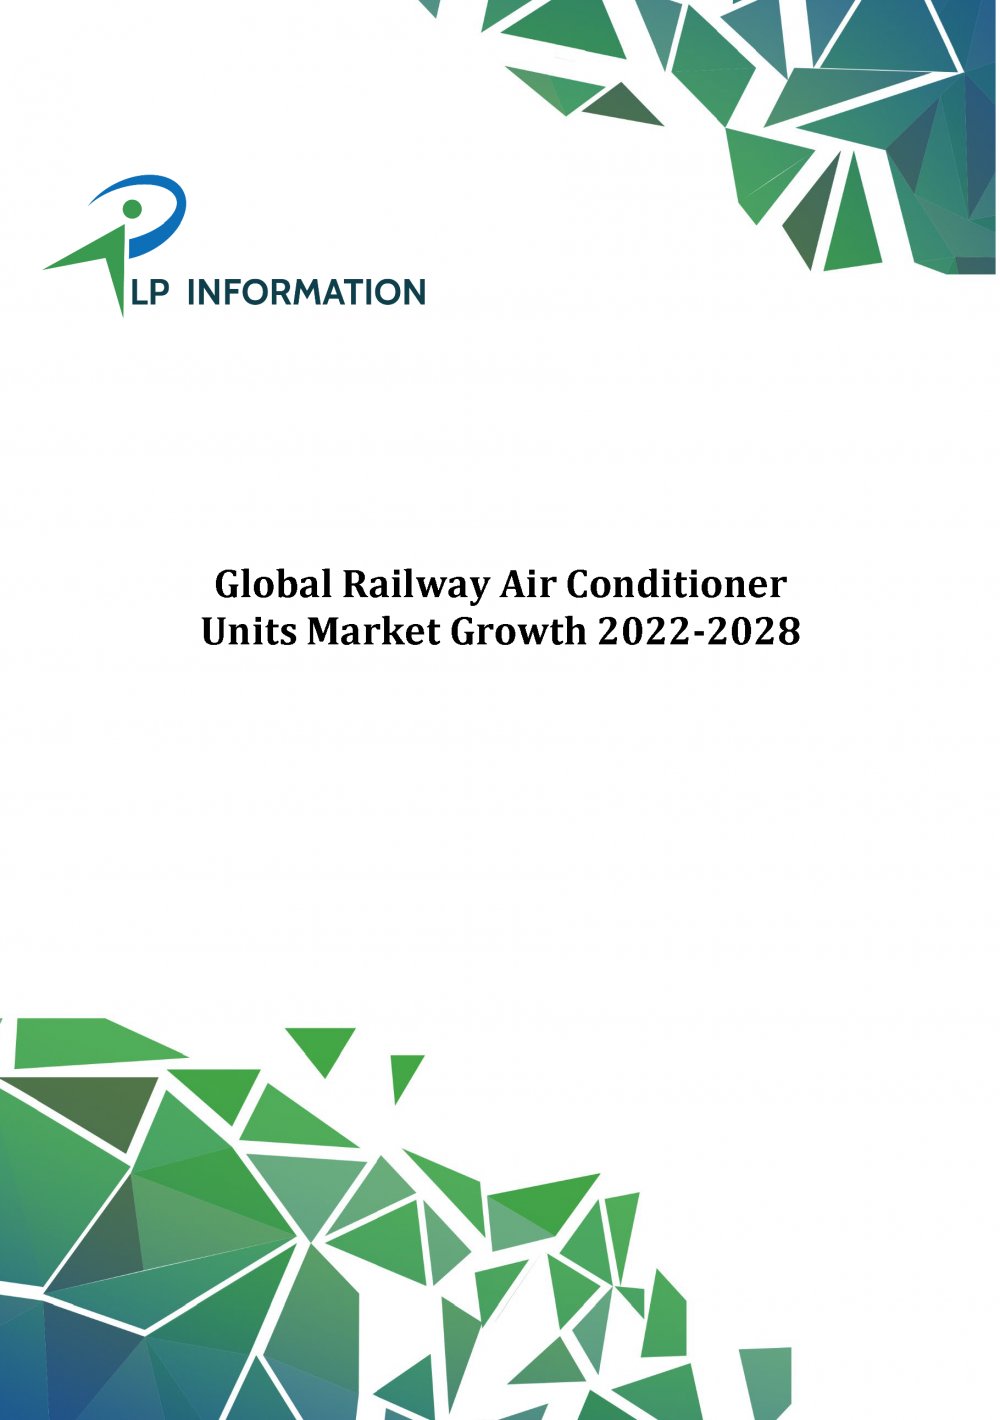 Global Railway Air Conditioner Units Market Growth 2022-2028